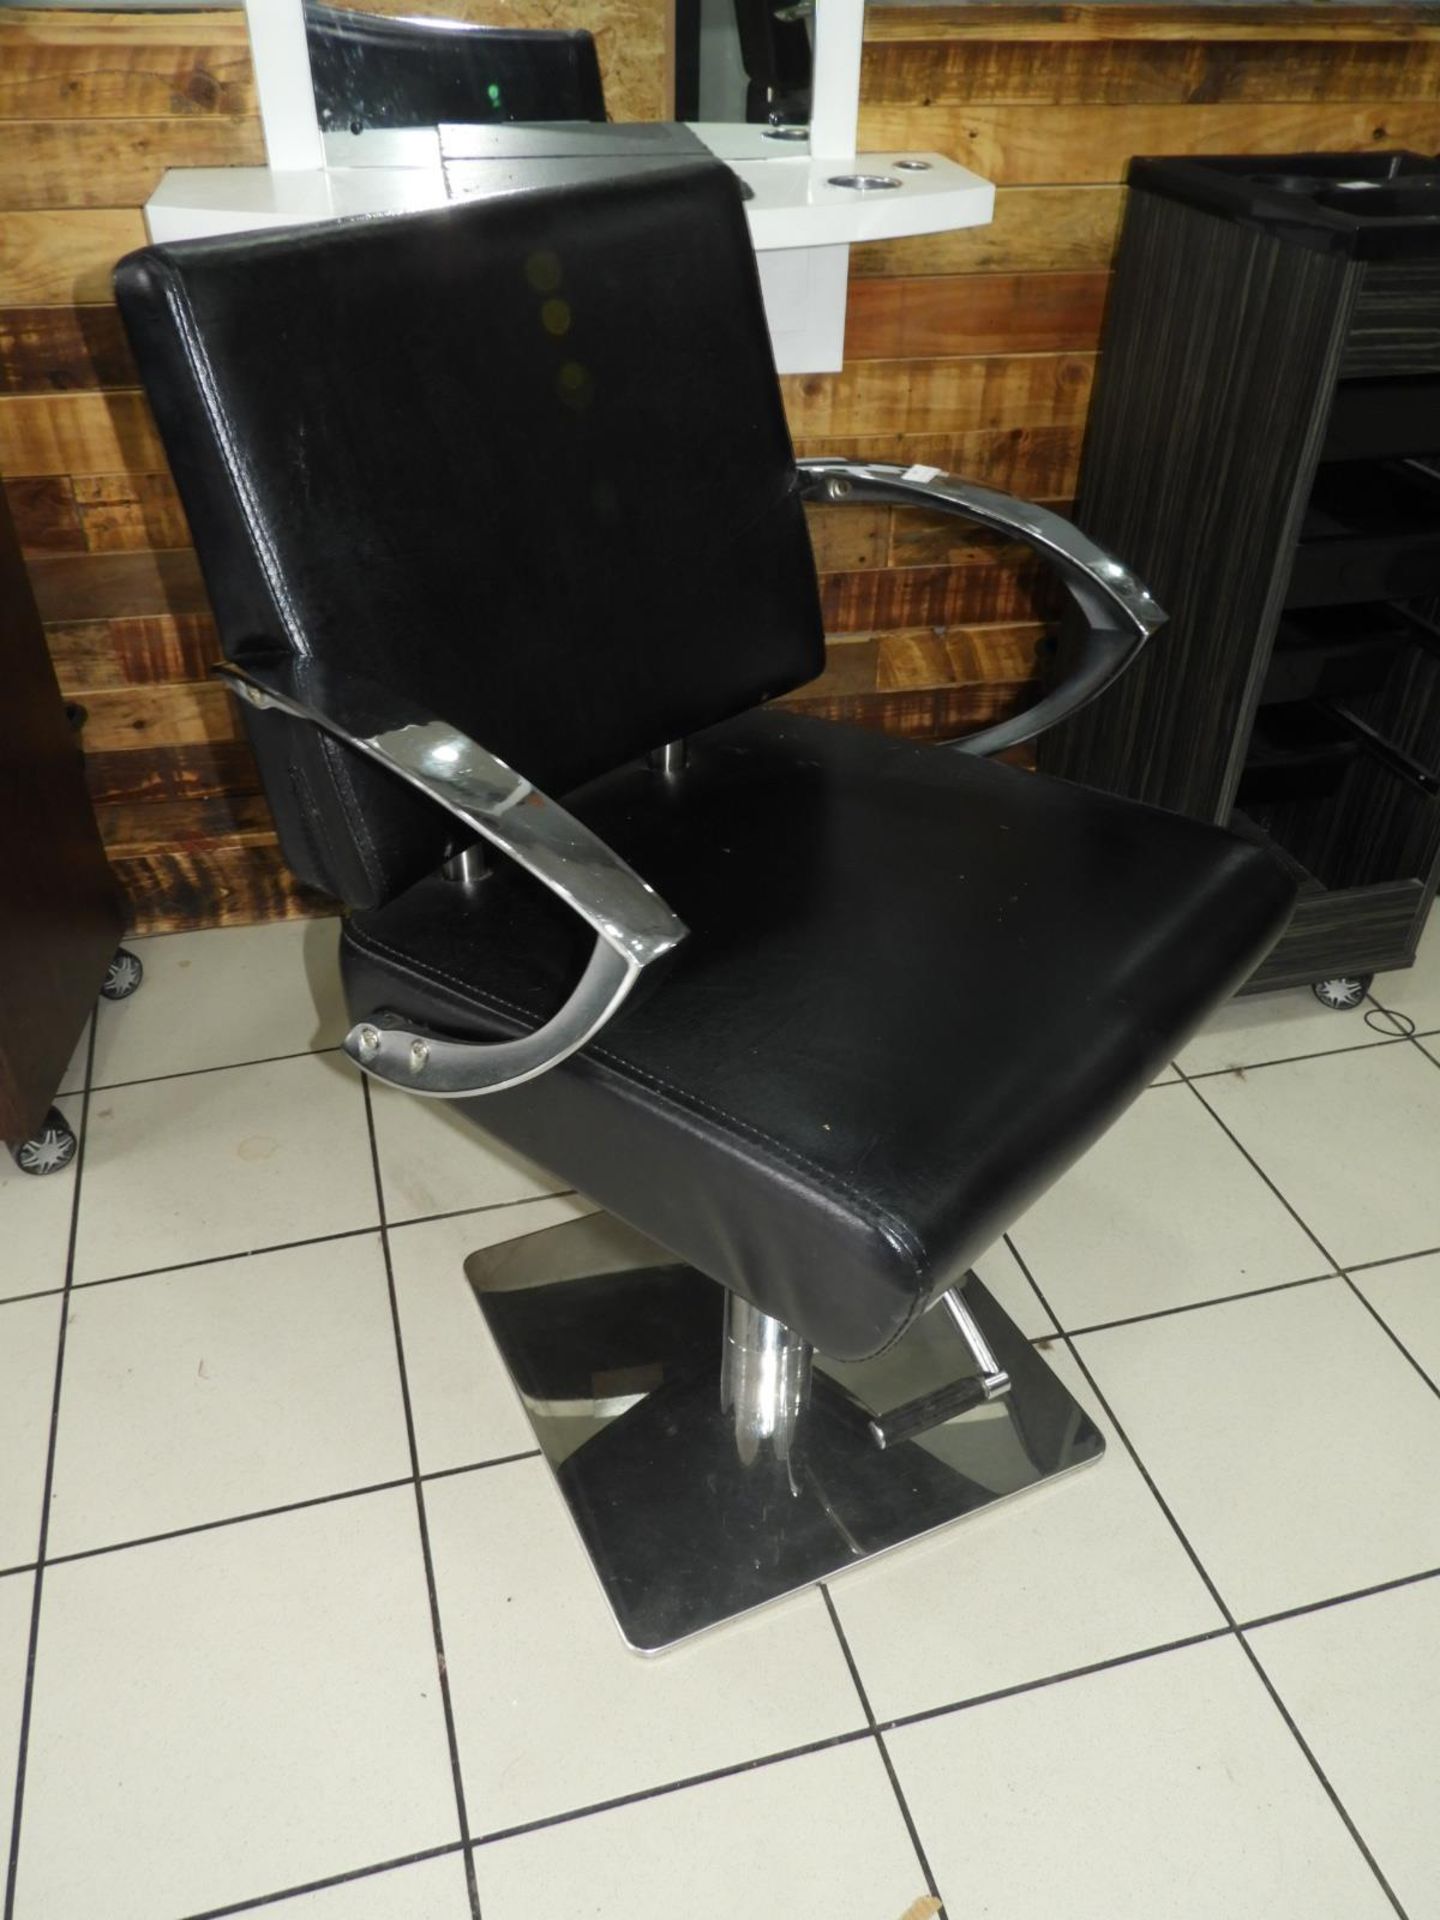 Gas Lift Stylists Chair